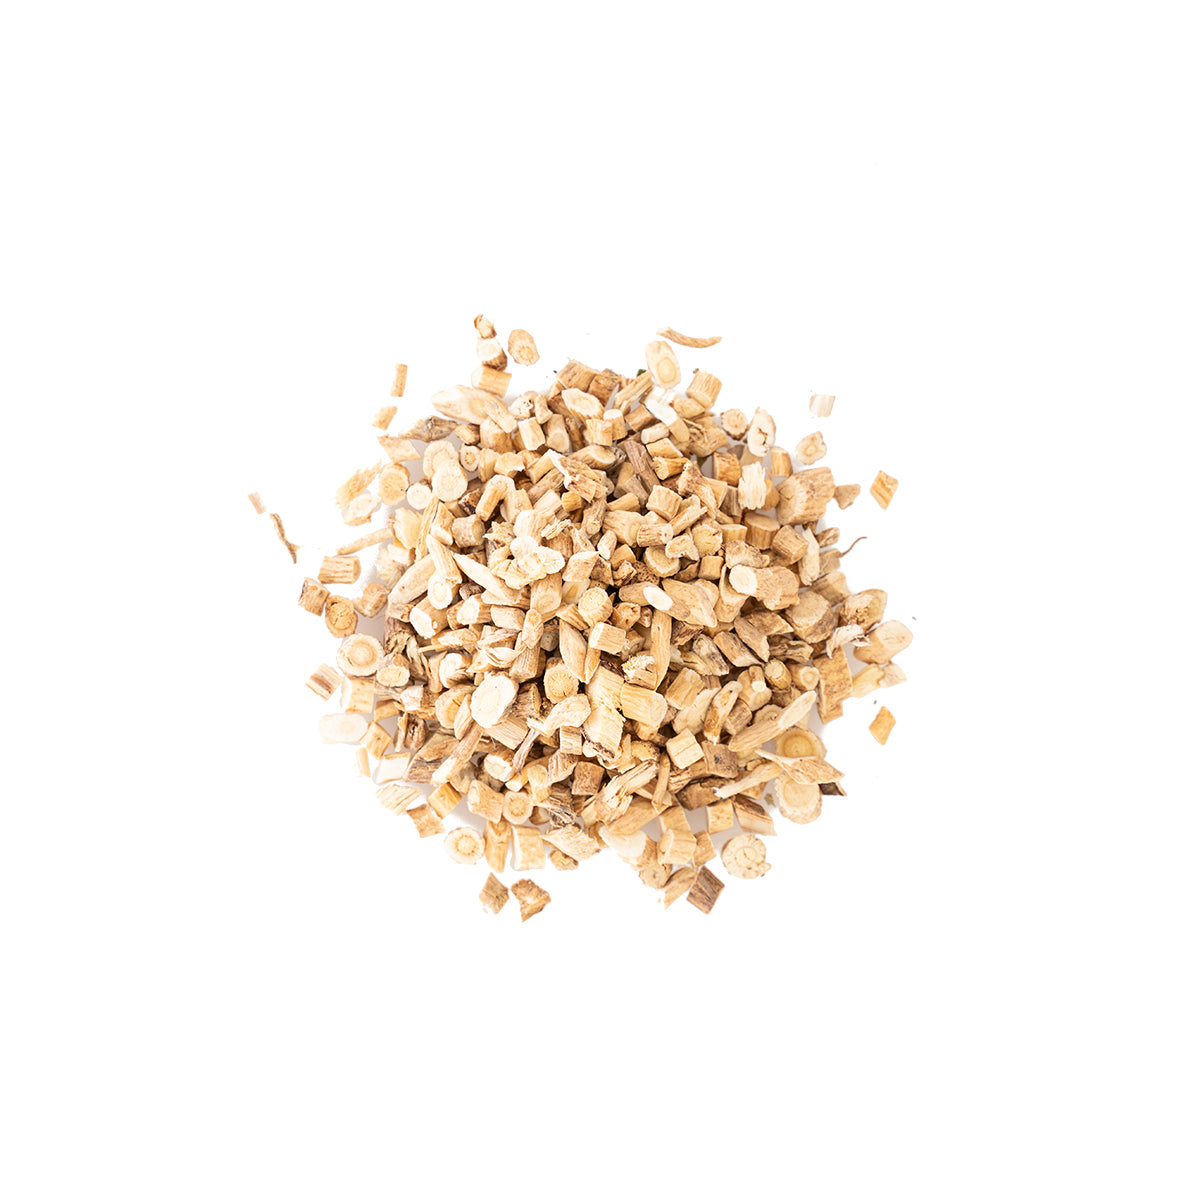 Primary Image of Astragalus Root-Organic